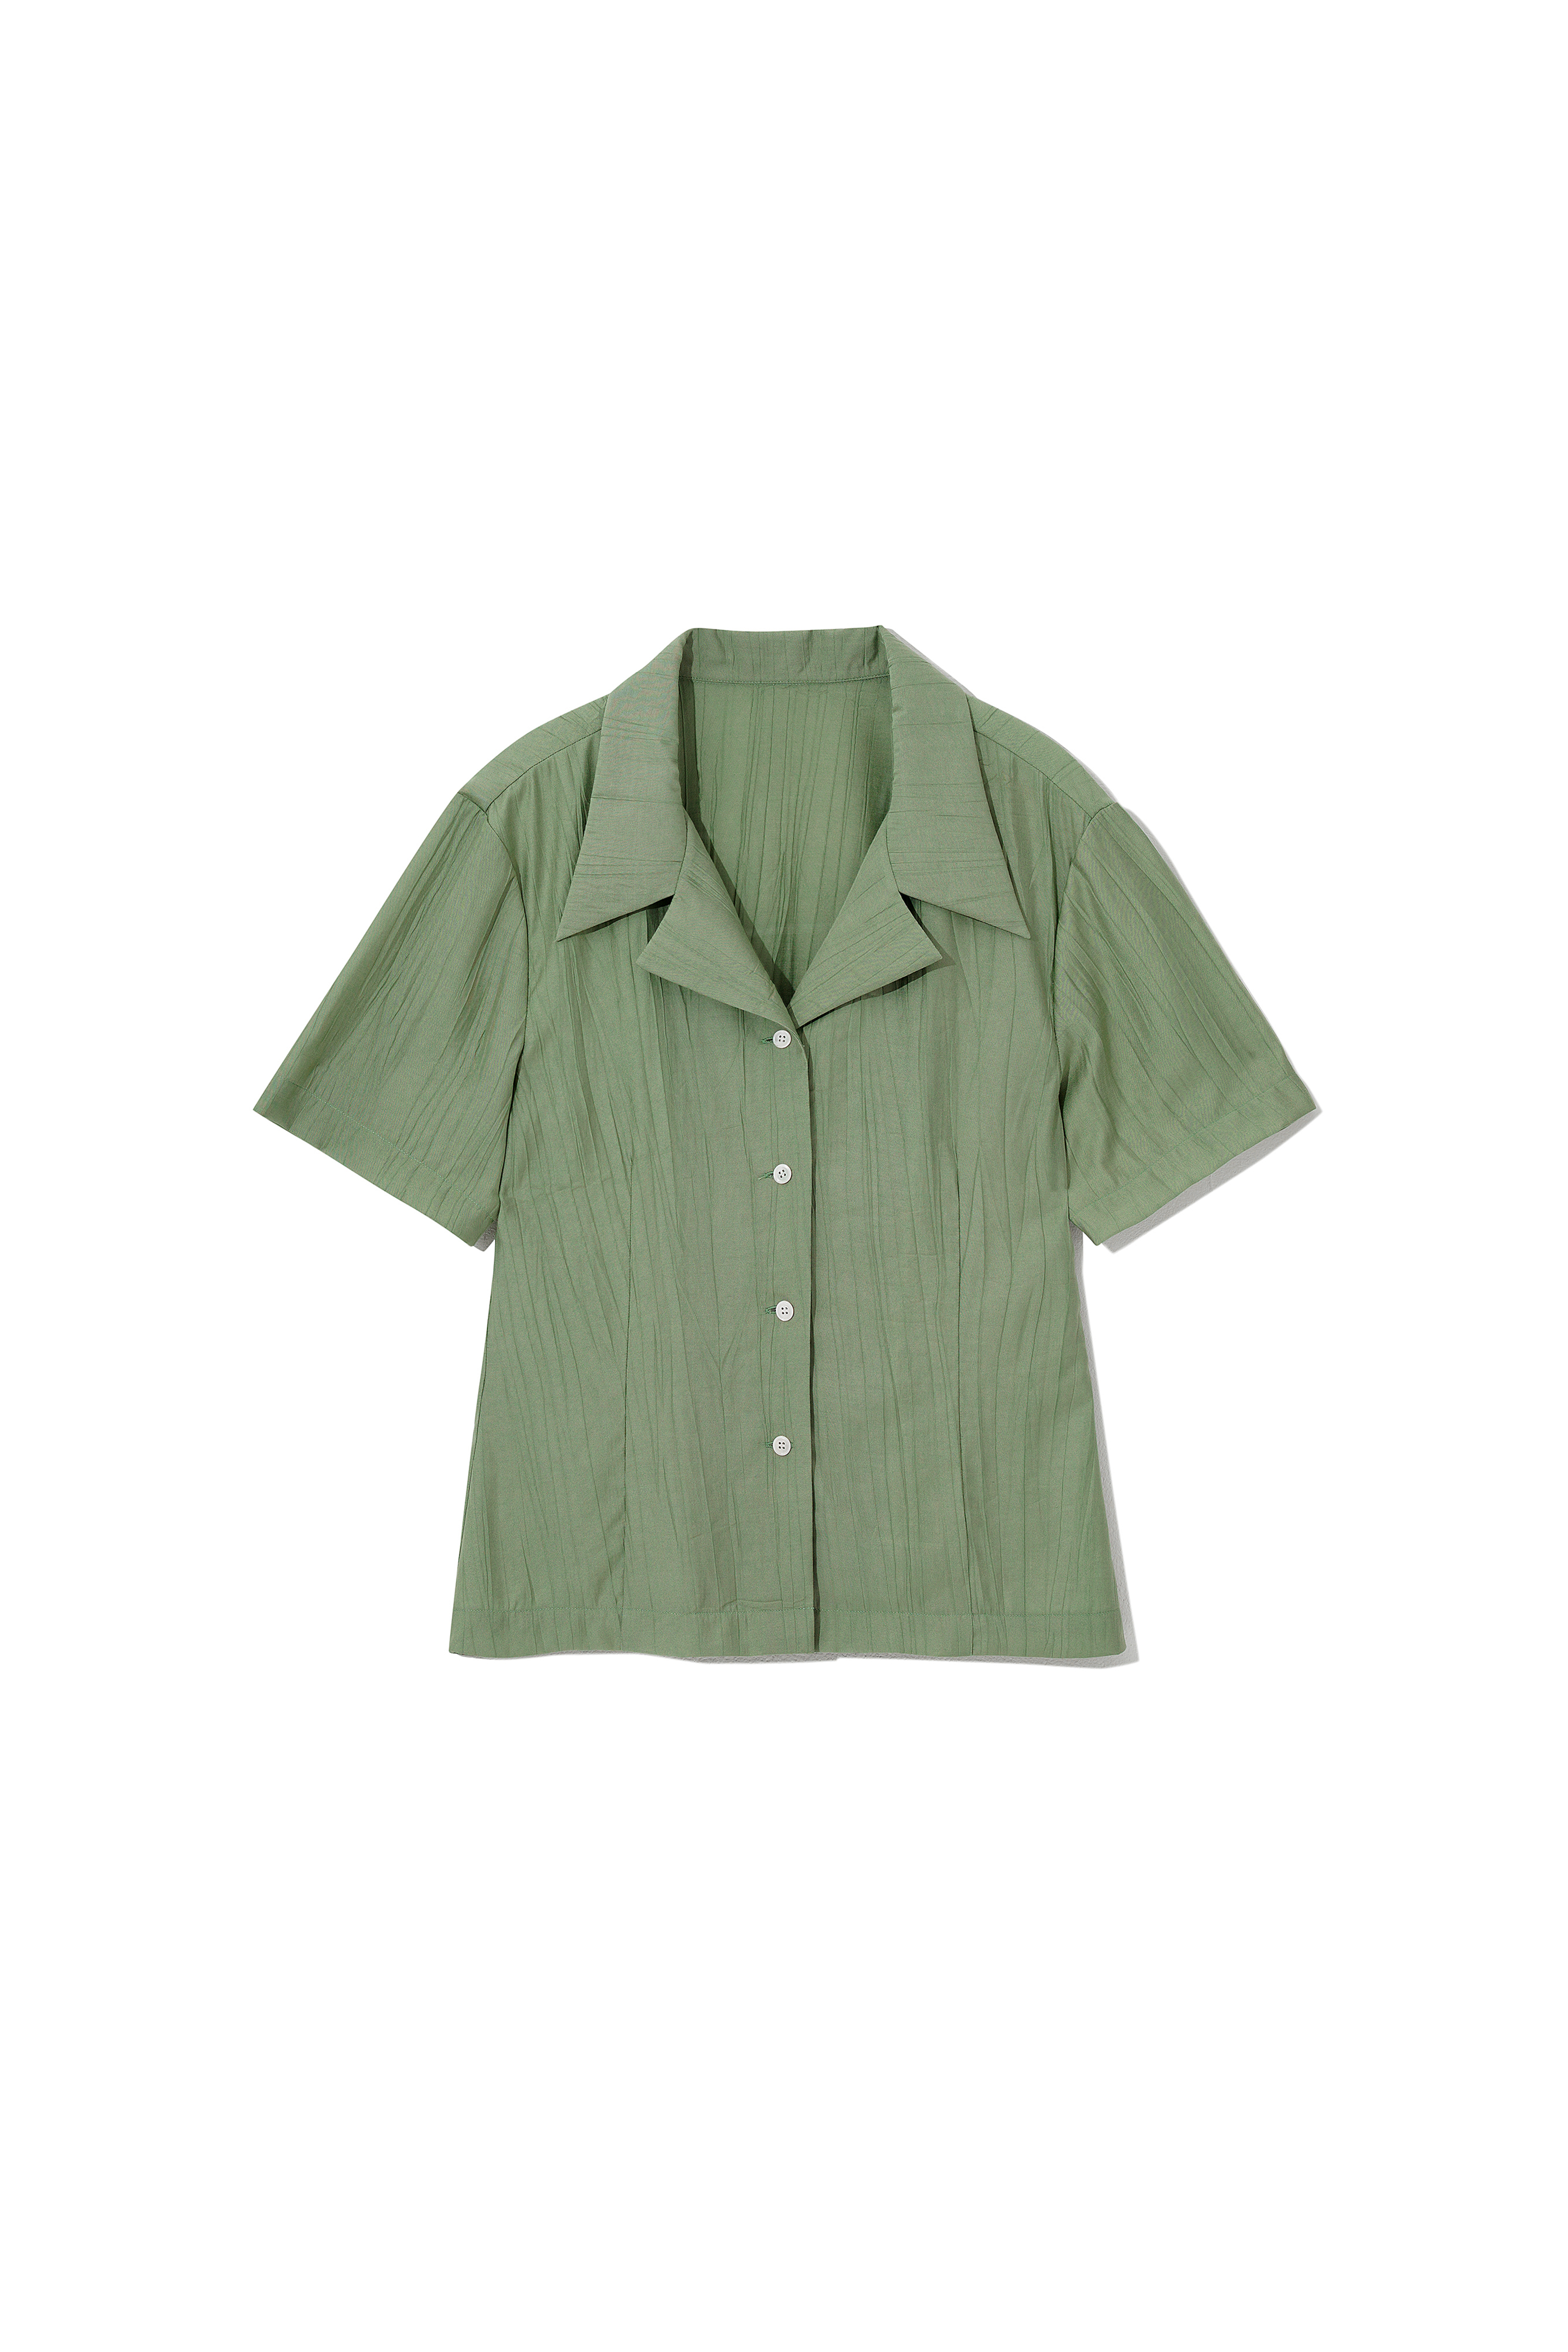 Delphy Pleats Shirts Green [06.07(WED) 20:00]